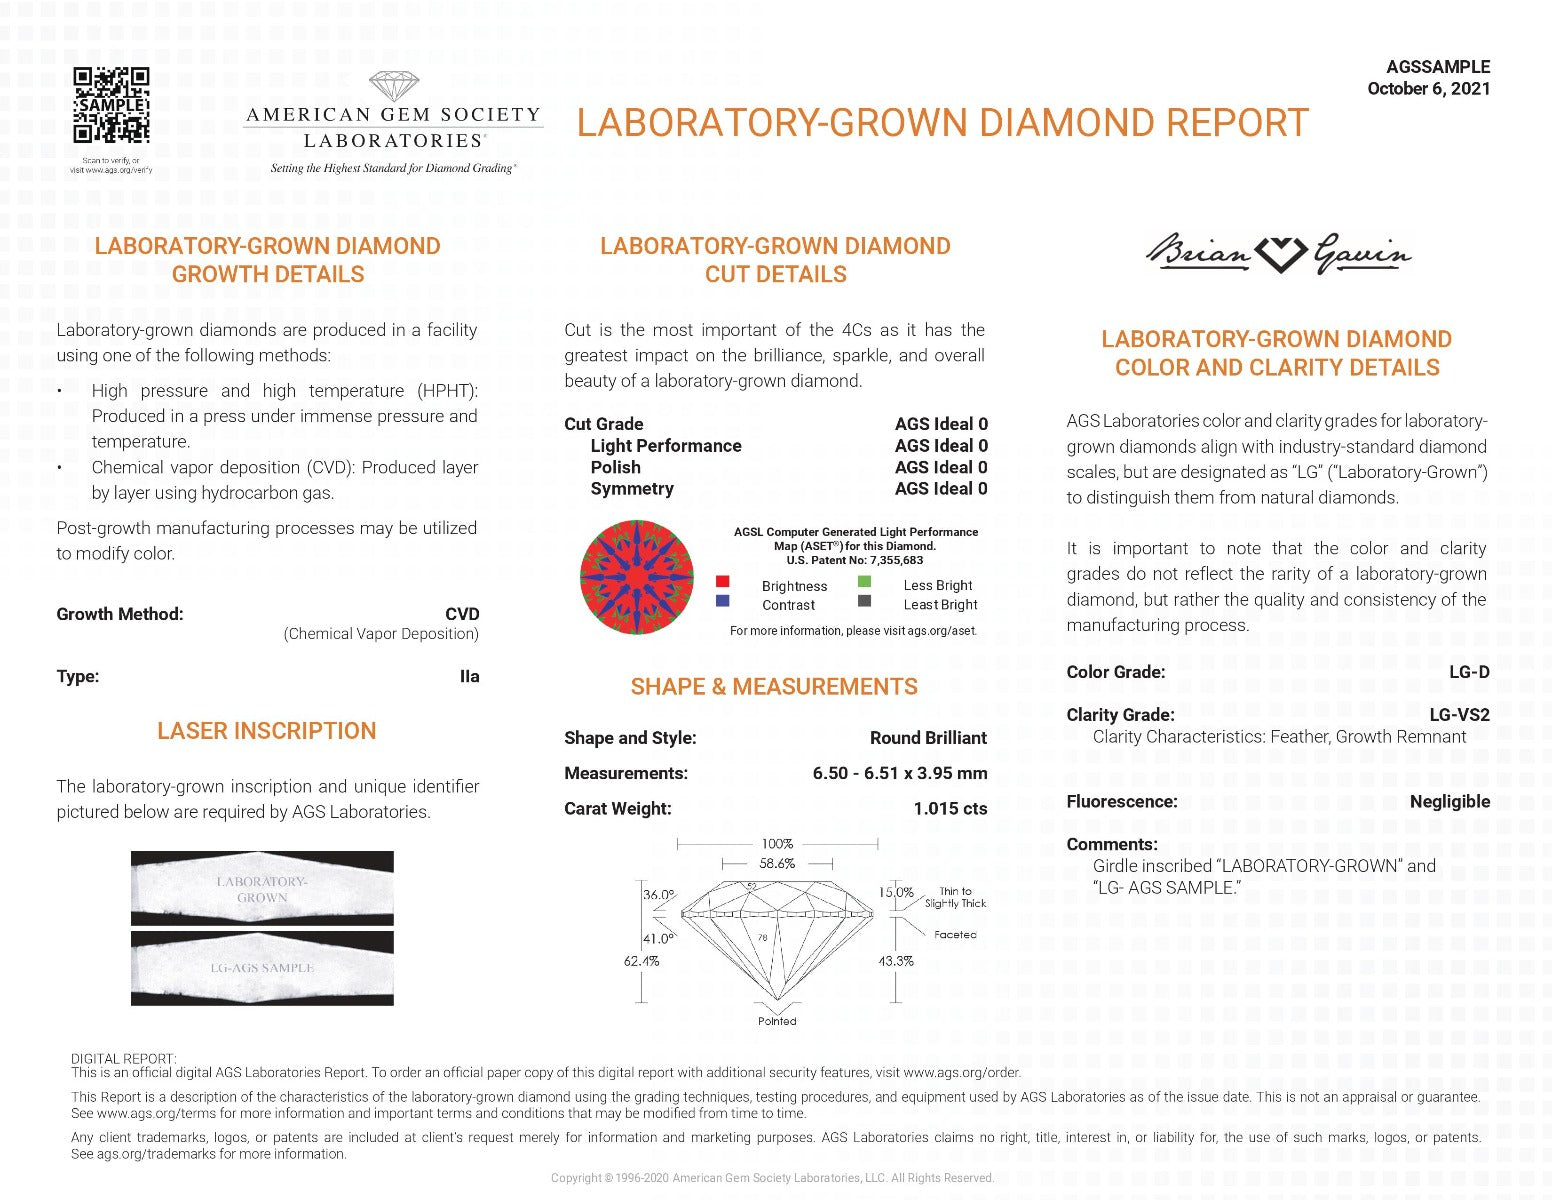 Exampled of a Laboratory-Grown Diamond Report